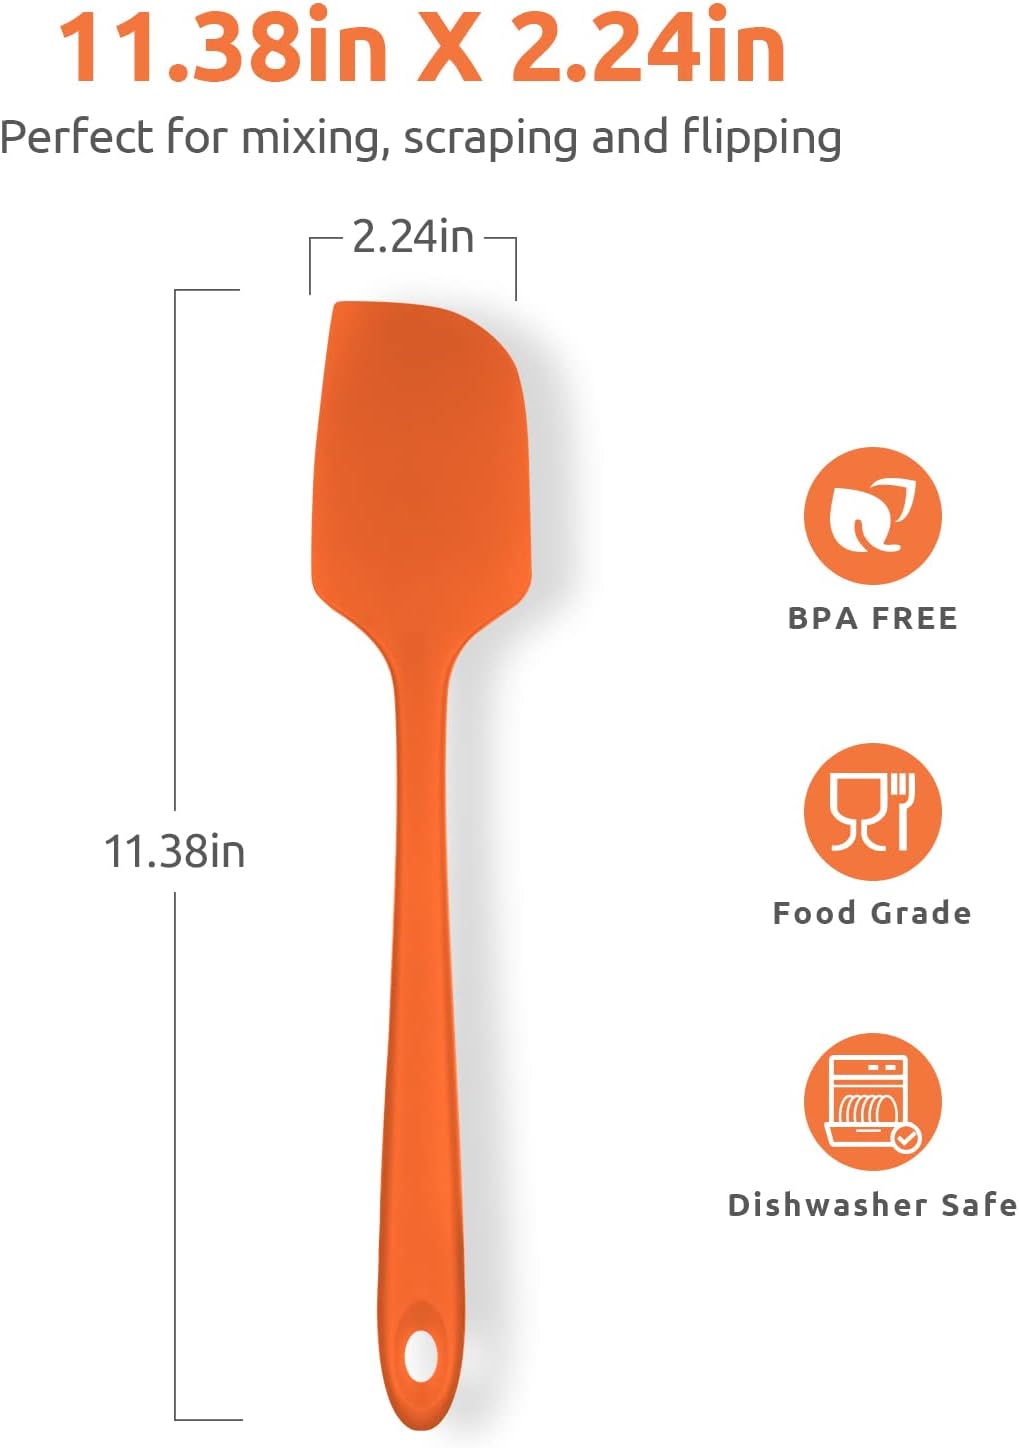 35.6cm Extra Large Silicone Spatula: U-Taste 315℃ Heat Resistant Long Flexible Rubber Bowl Scraper Seamless Mixing Stirring Cooking Scraping Baking Spreader for Kitchen Nonstick Cookware (Purple)